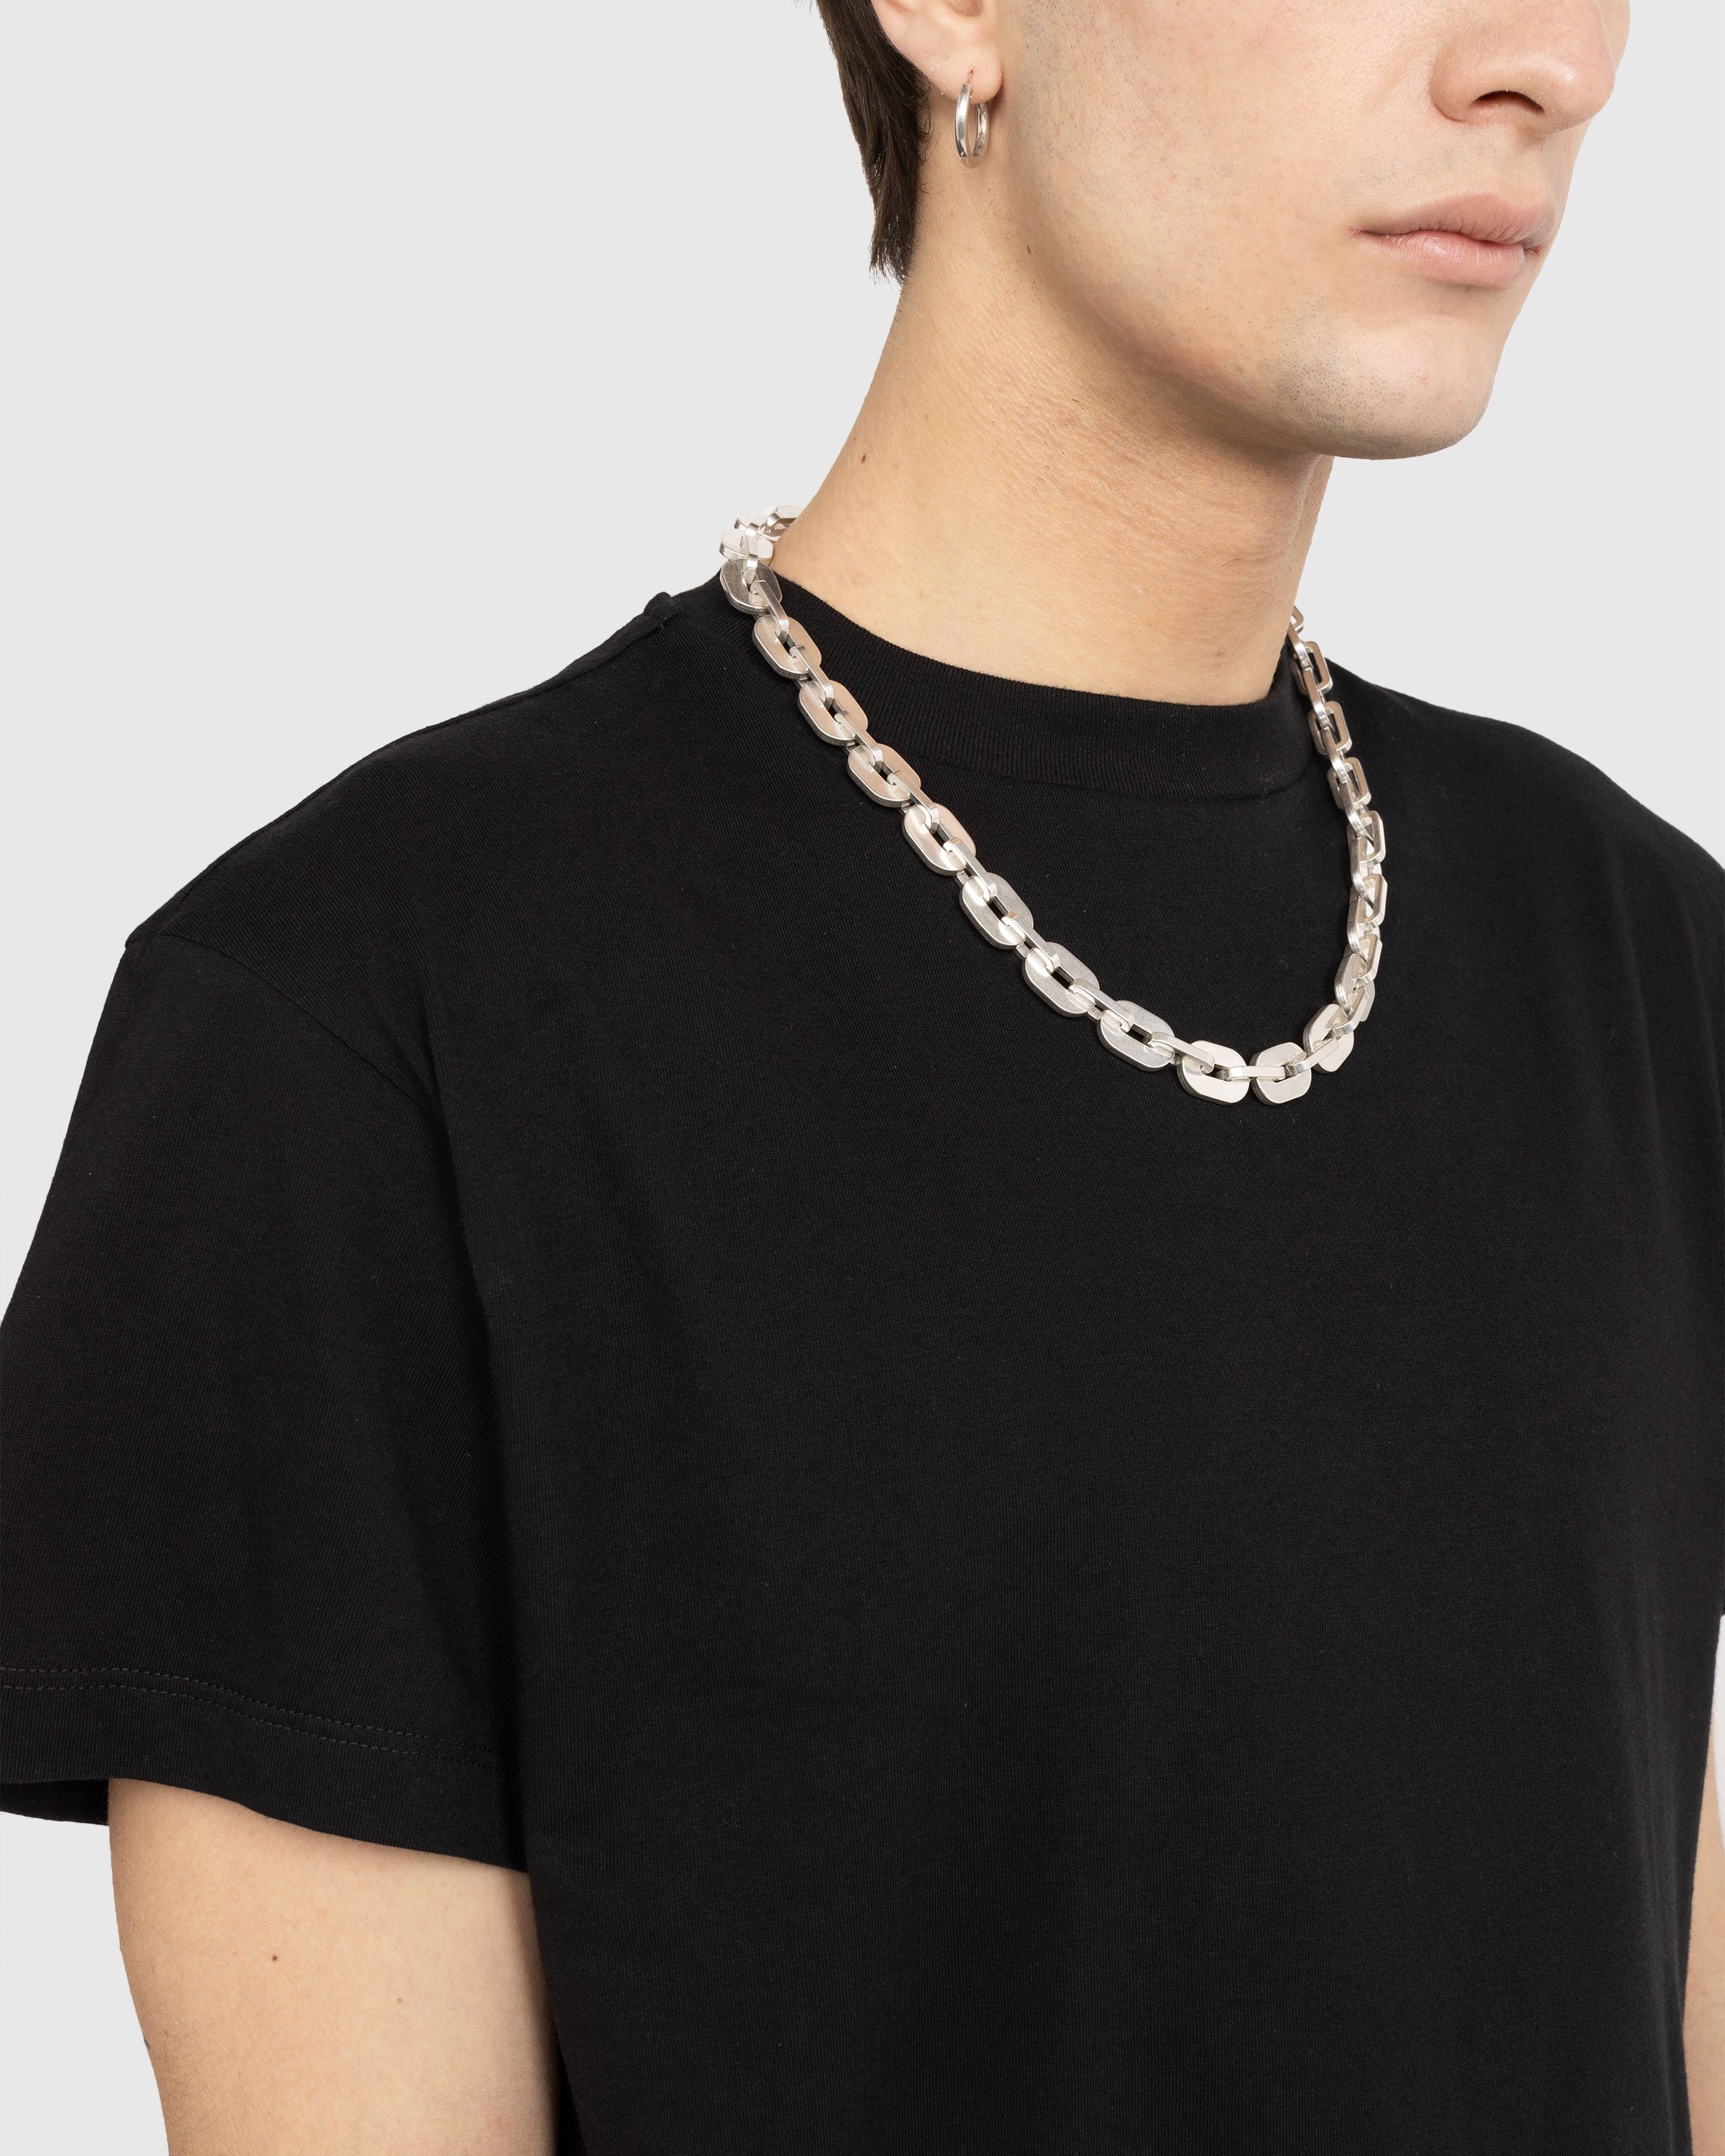 Jil Sander - Brass Chain Necklace Silver - Accessories - Silver - Image 2